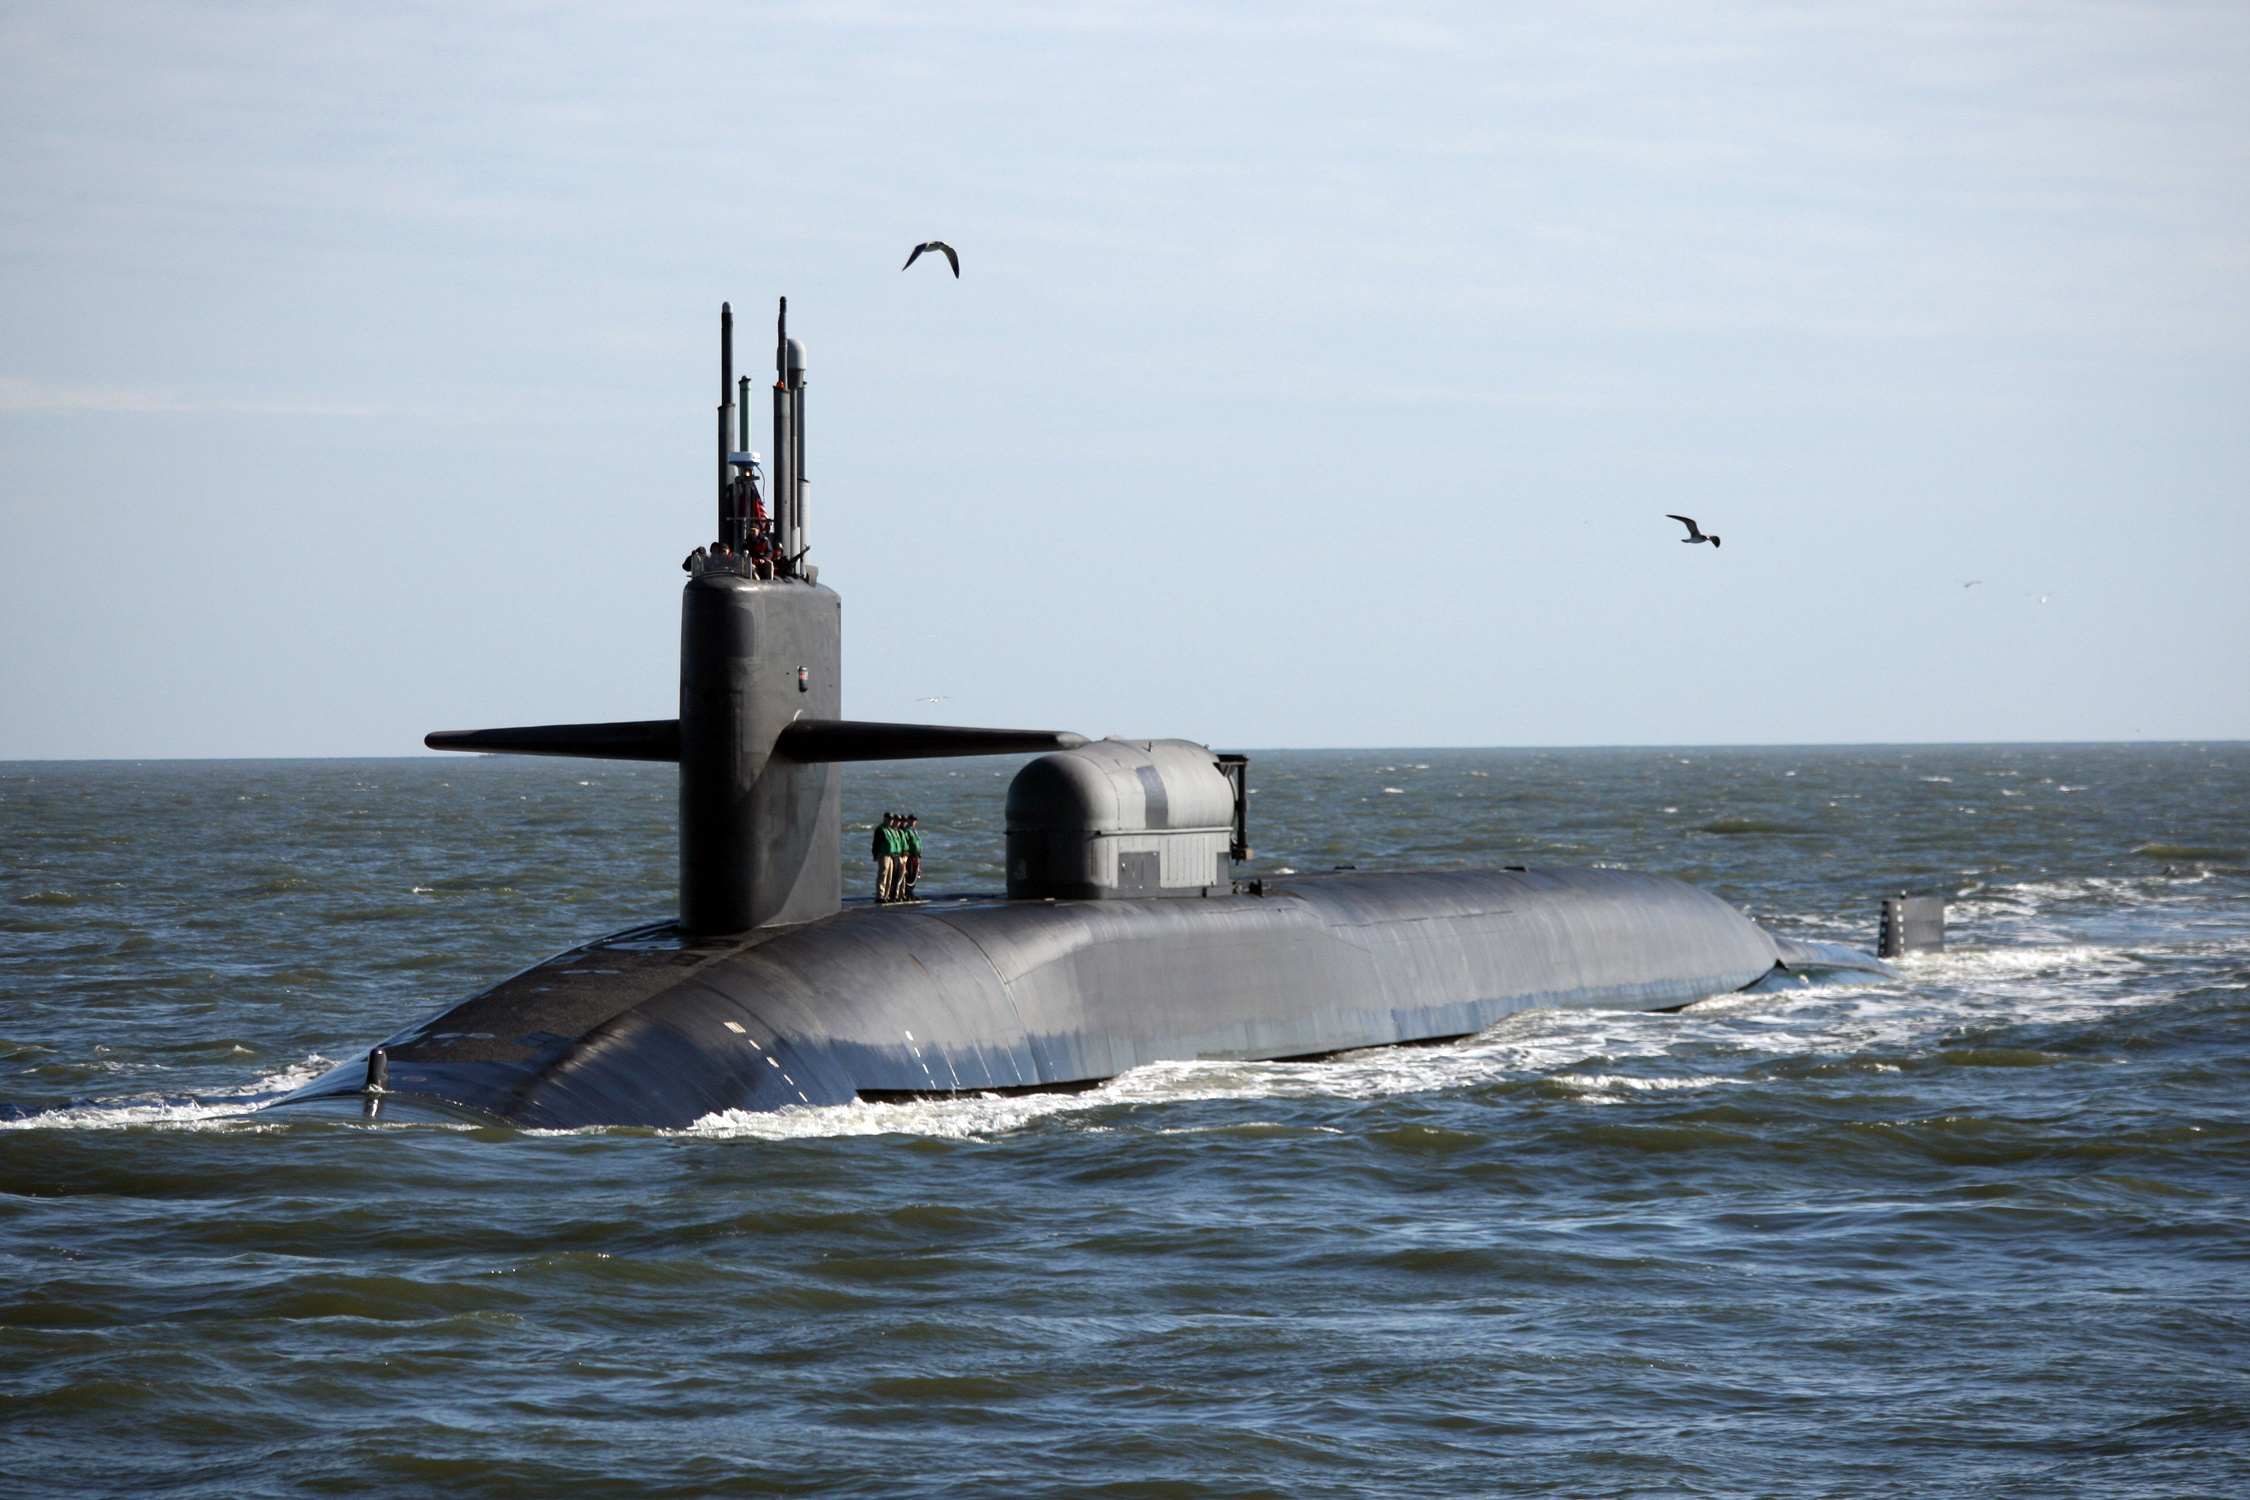  georgia extension nuclear submarine military navy wallpaper background